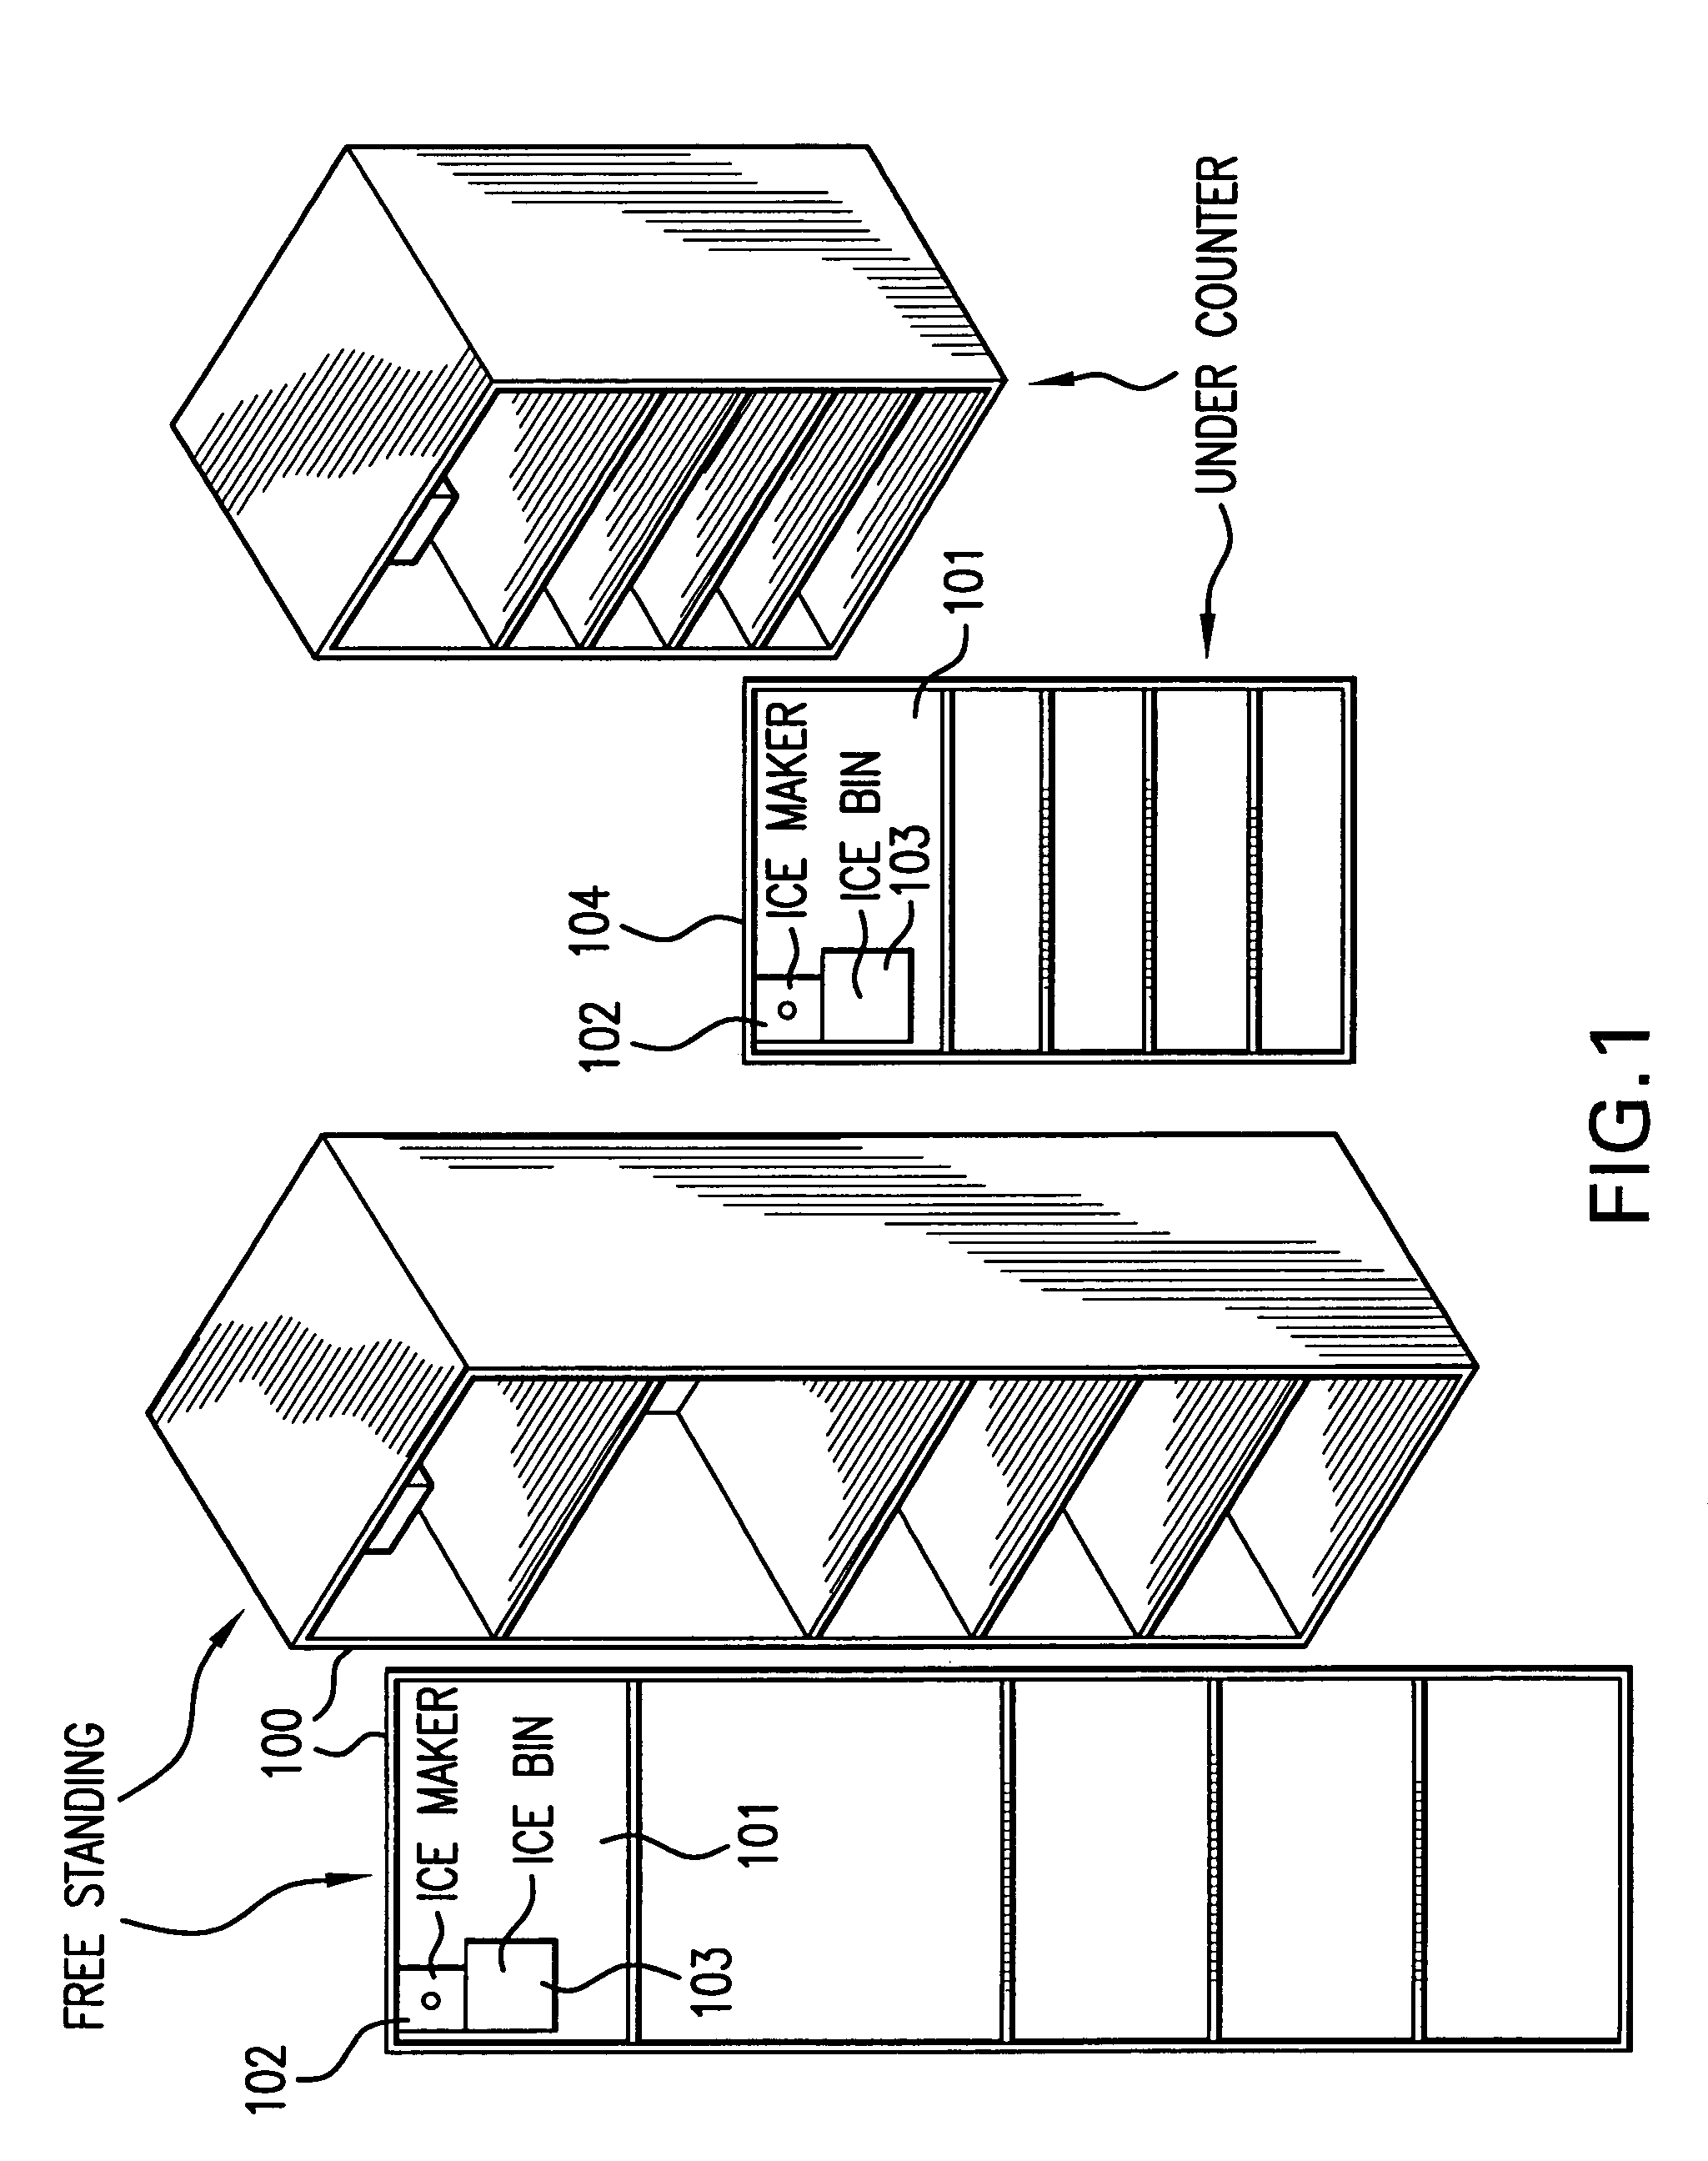 Variable rate and clarity ice making apparatus